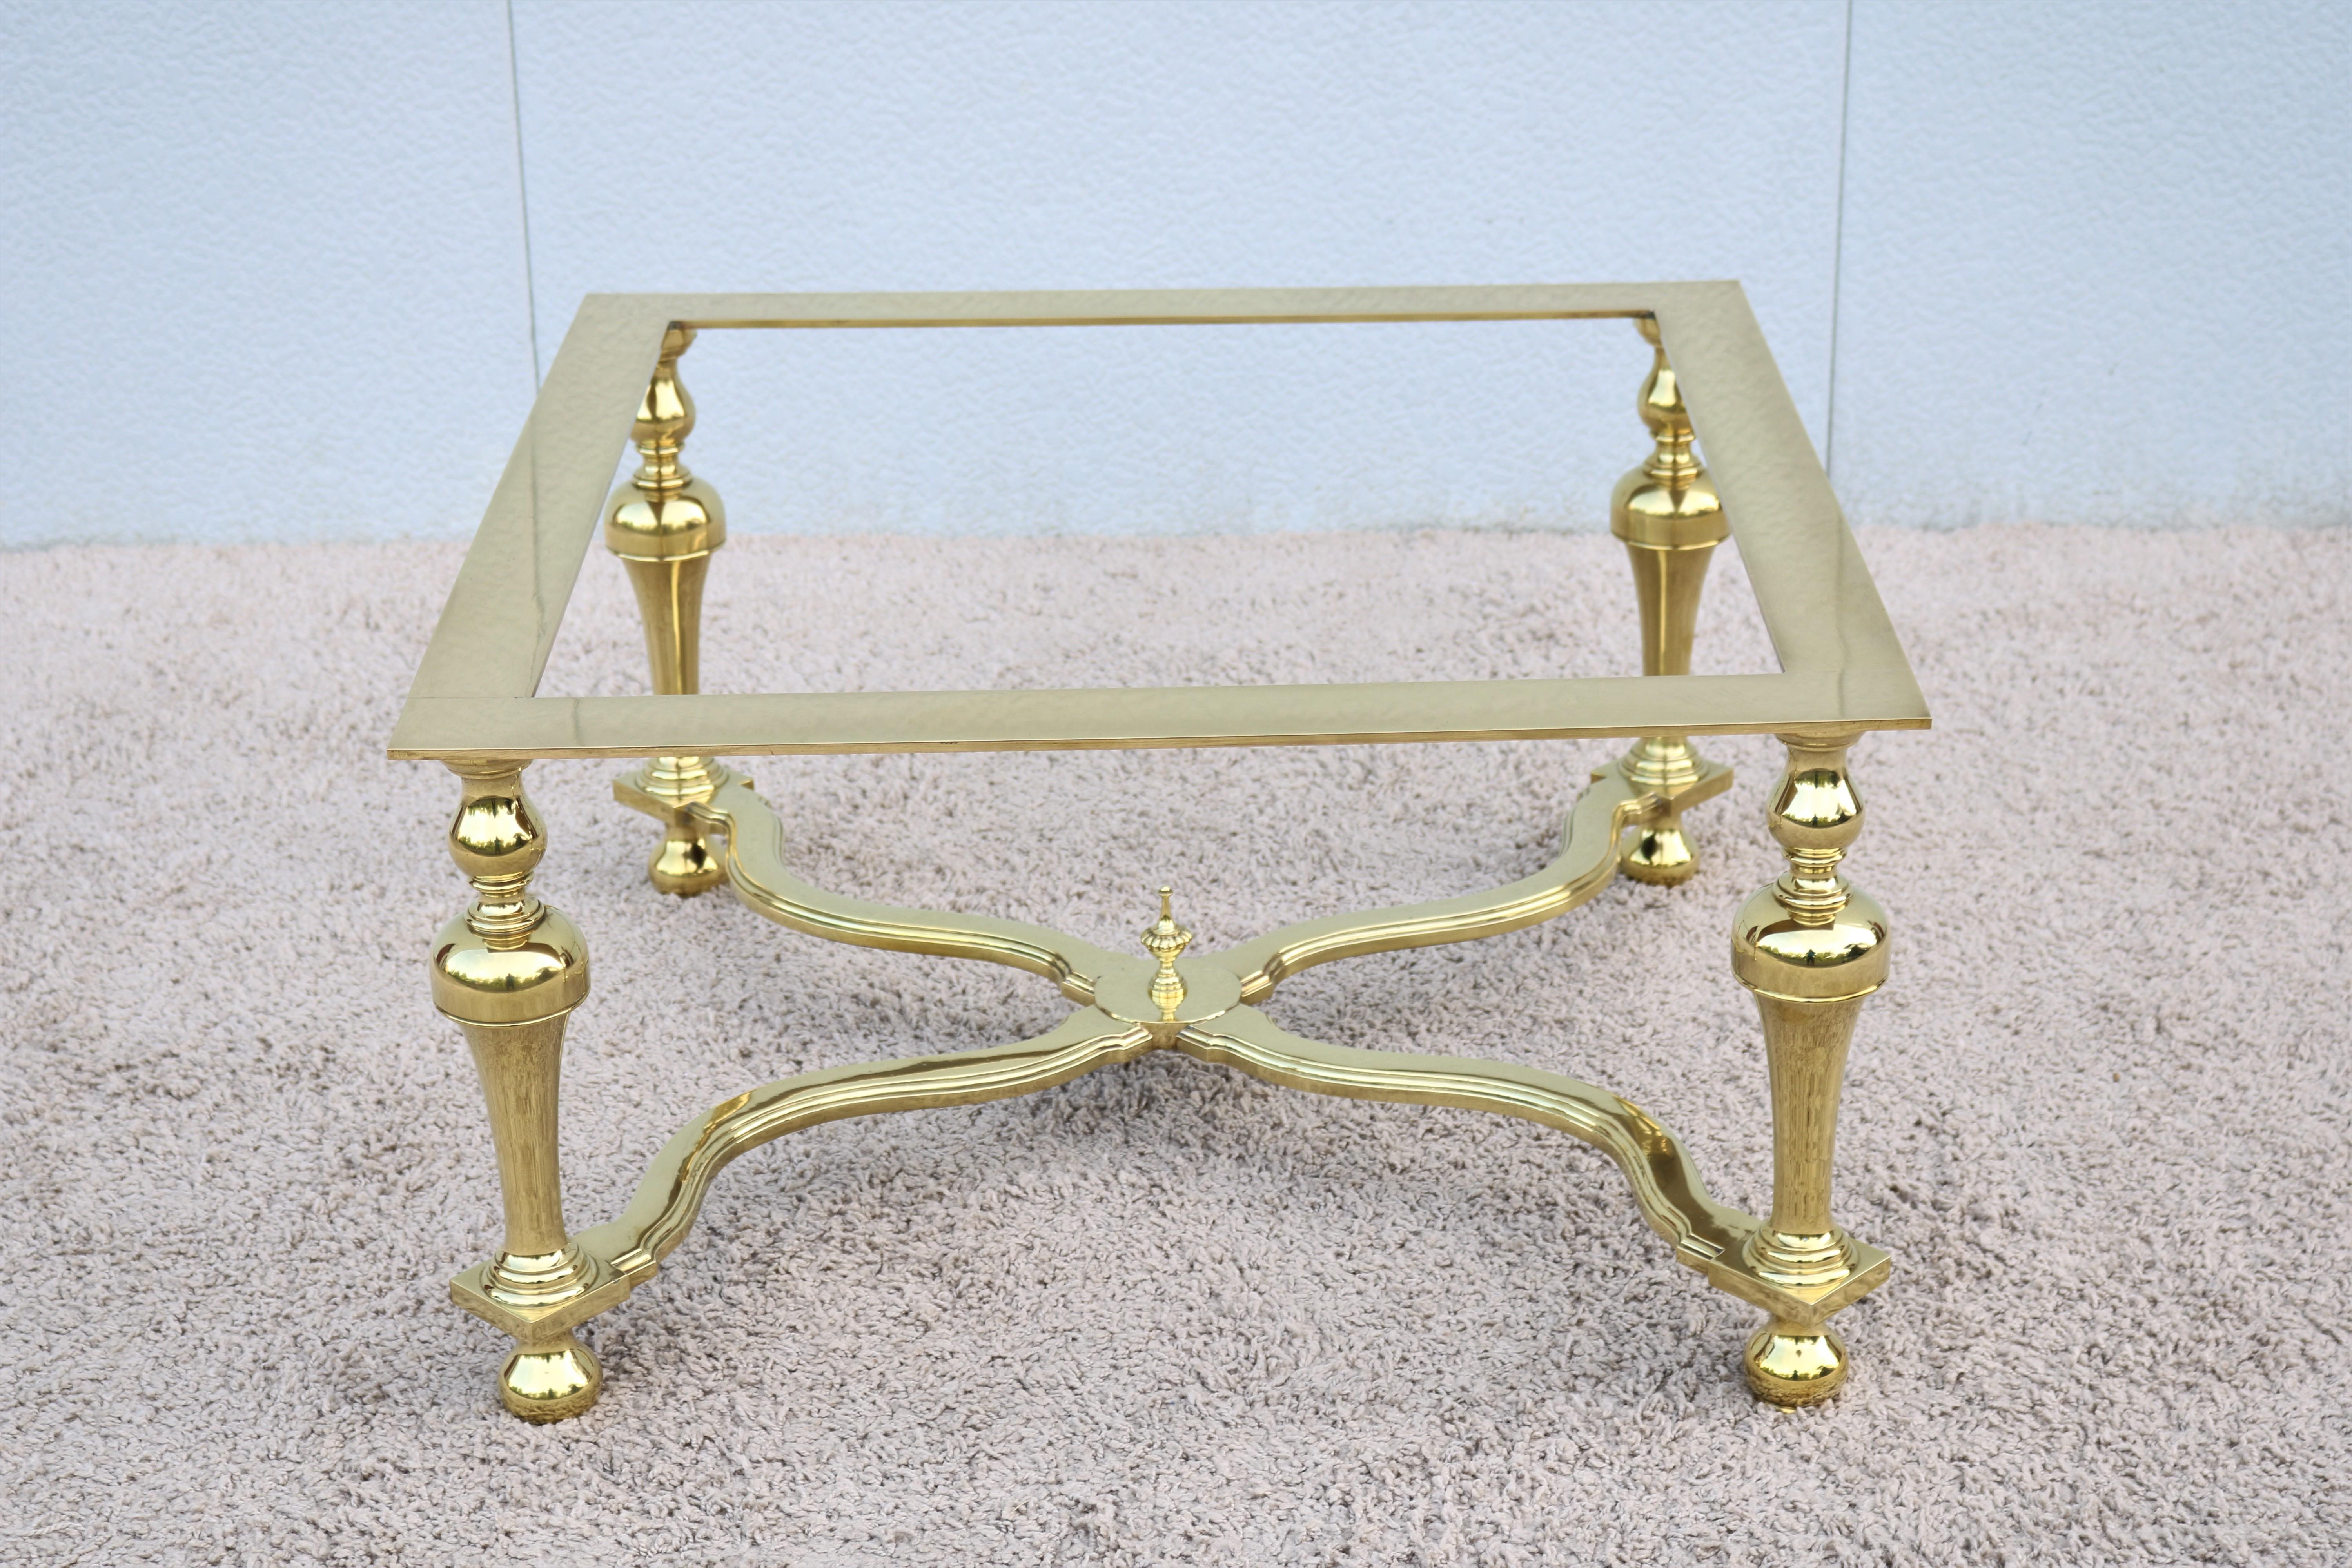 1970s Hollywood Regency Maison Jansen Style Brass and Glass Square Coffee Table For Sale 4